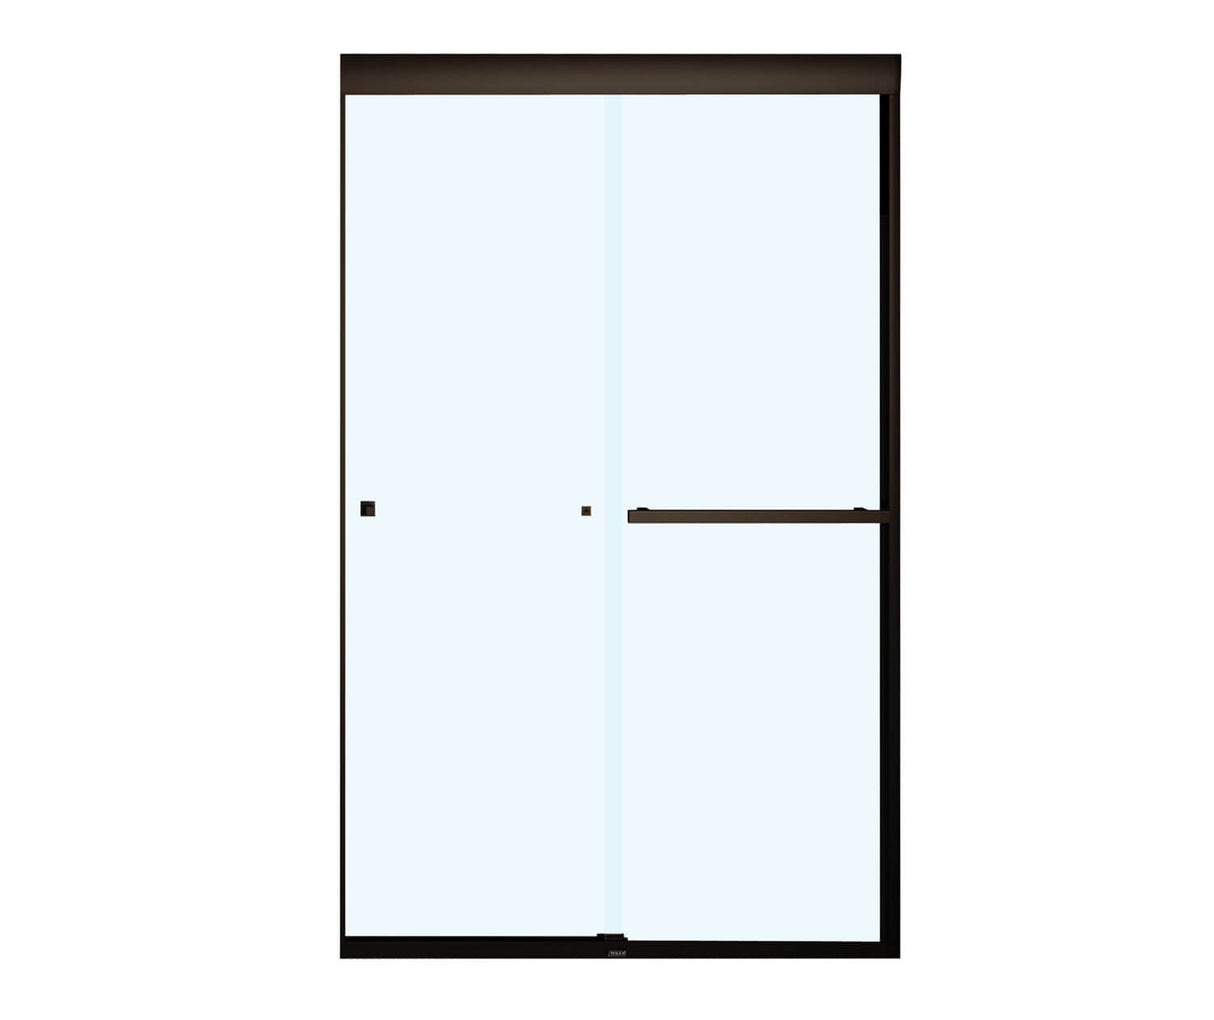 MAAX 135674-900-172-000 Aura SC 43-47 in. x 71 in. 8 mm Bypass Shower Door for Alcove Installation with Clear glass in Dark Bronze